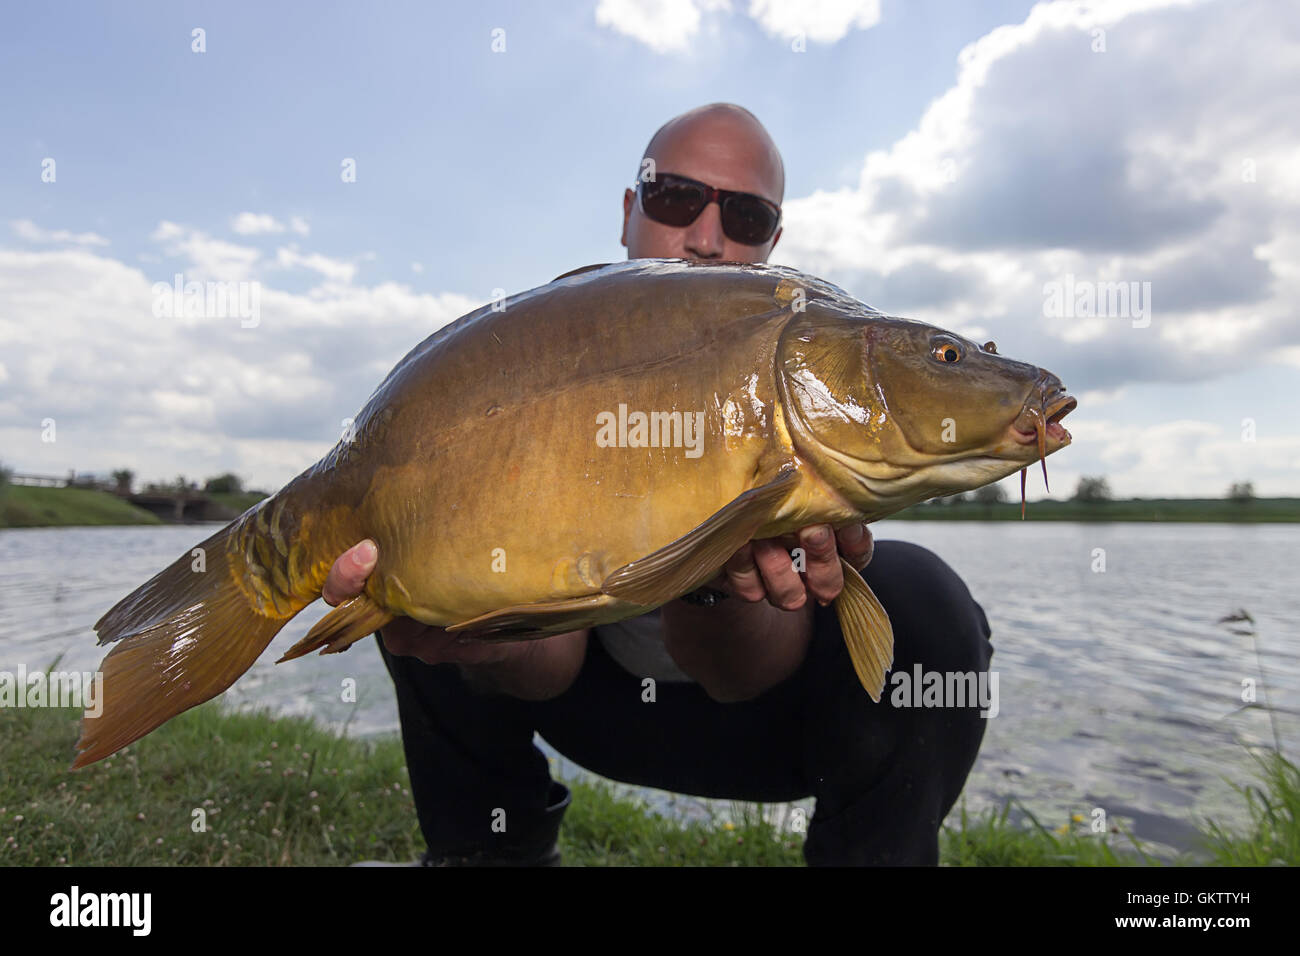 Big Fisher Hook stock photo. Image of angling, sport - 157035354